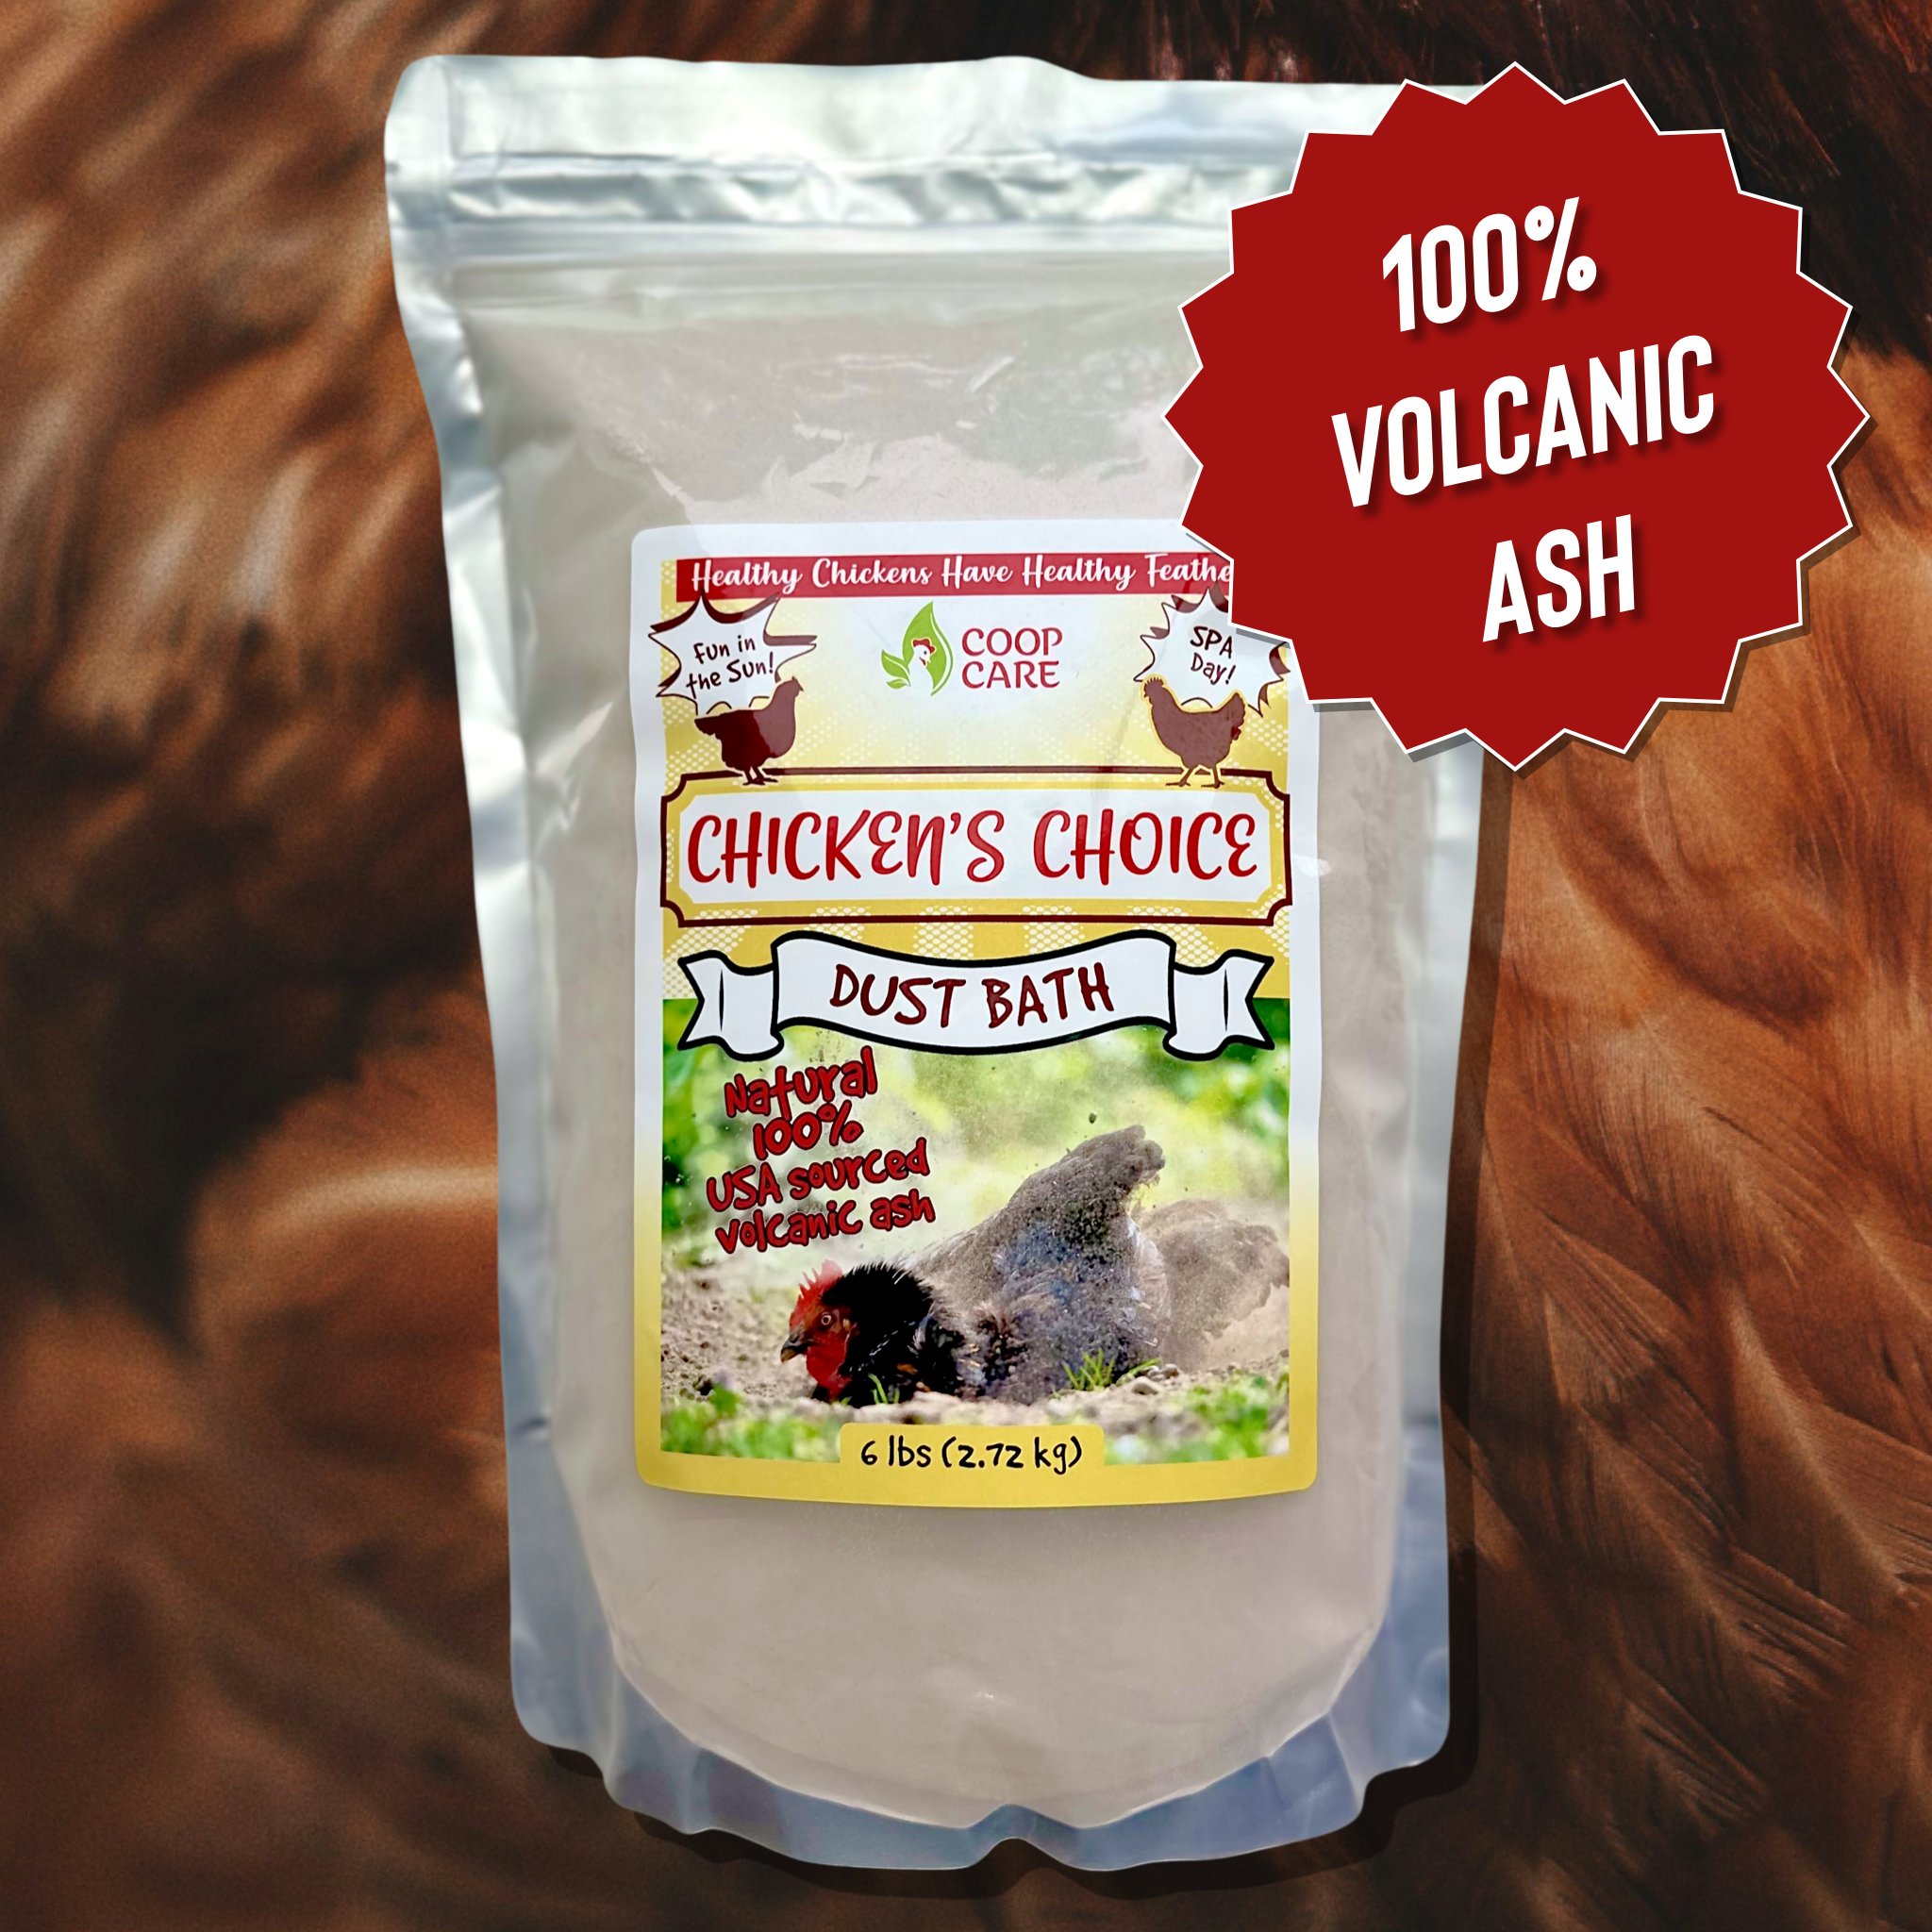 Chicken’s Choice Dust Bath – All-Natural Dust Bath Additive for Chickens and all types of Poultry to Help Remove Excess Oils and Keep Feathers in Tip Top Condition (6lb Resealable Pouch)